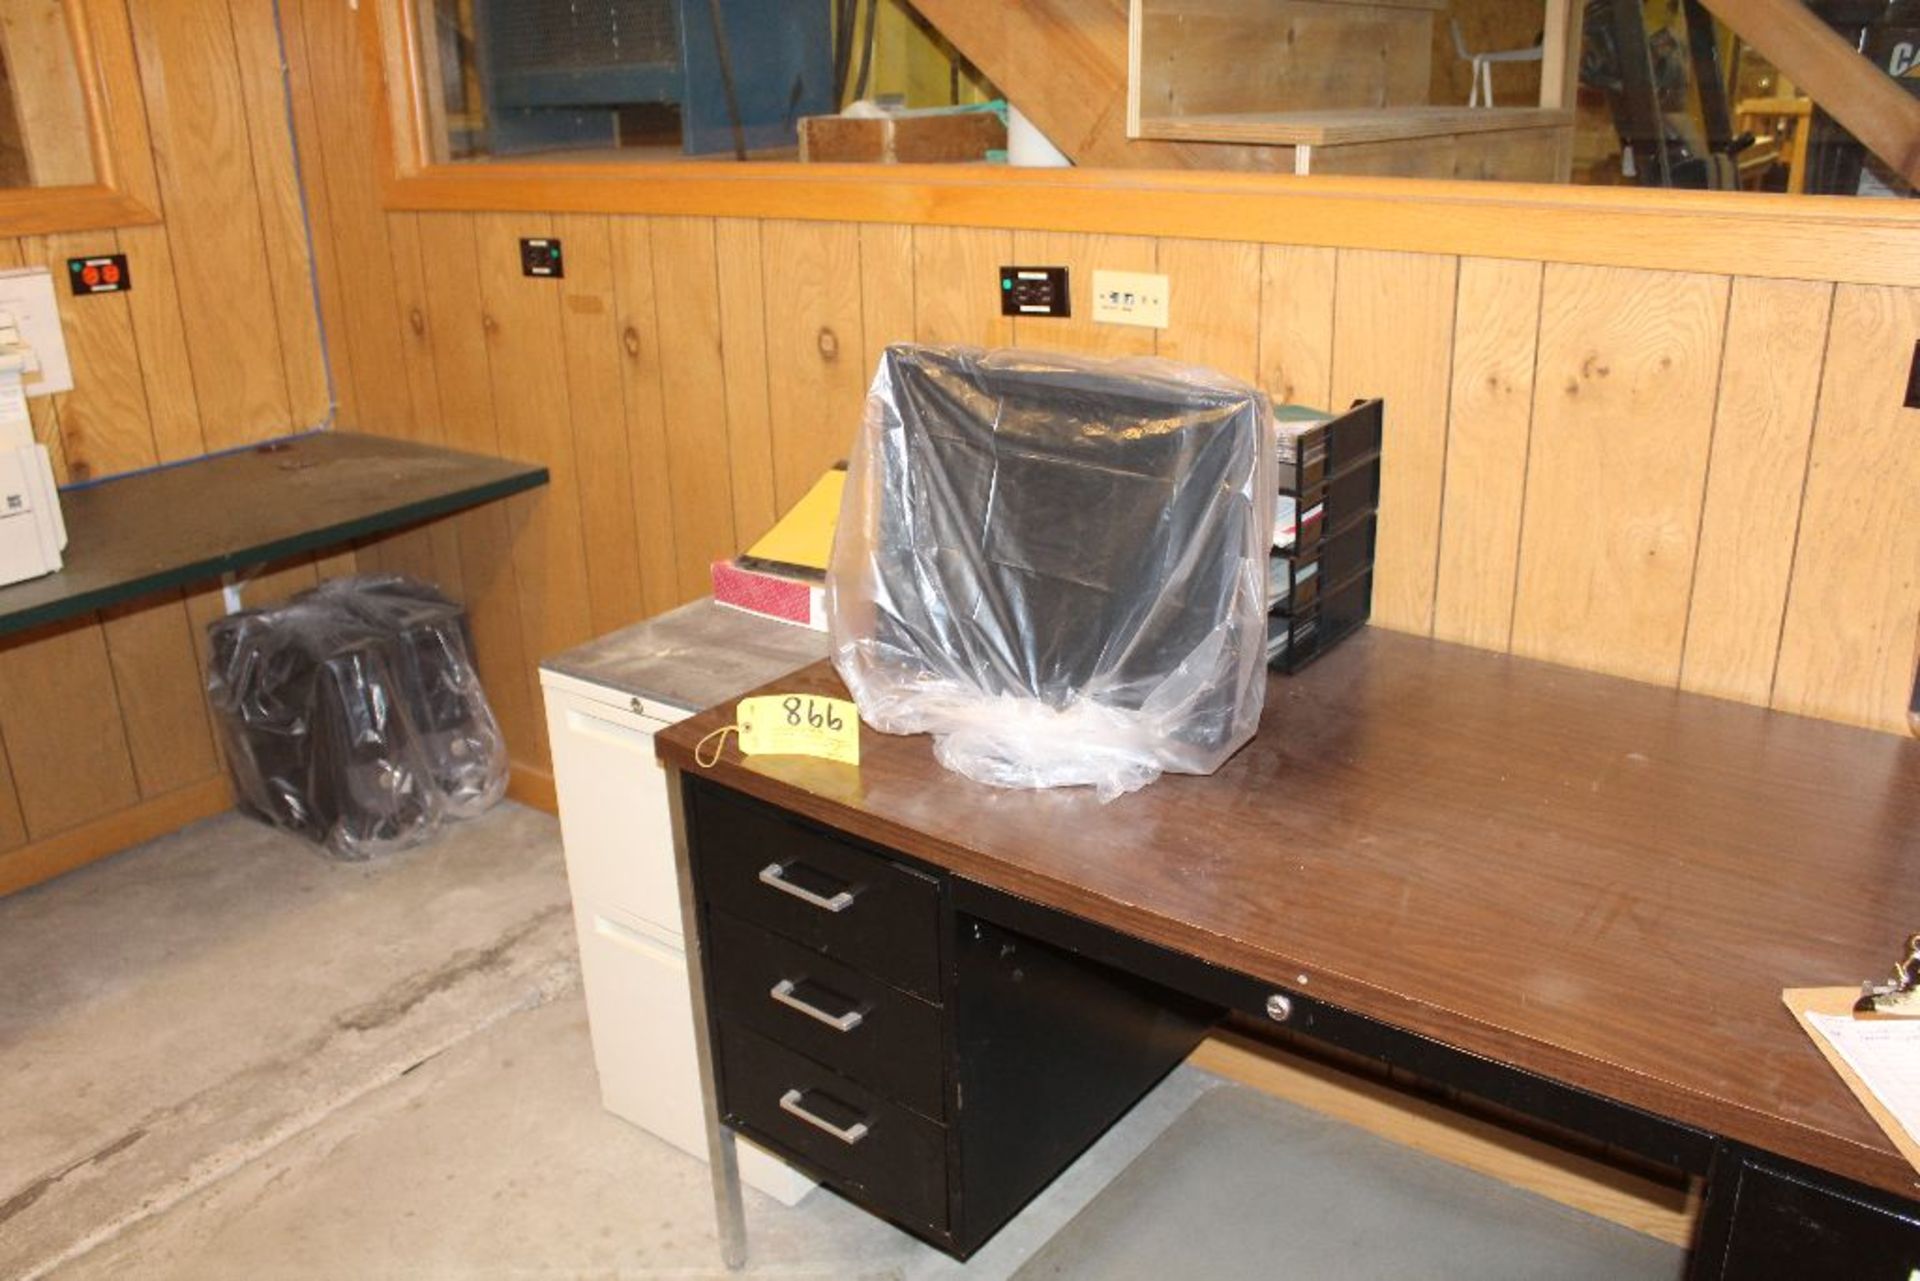 Contents of office steel desk, 2 drawer file cabinet, lanier copier, (2) chairs, (3) monitors.